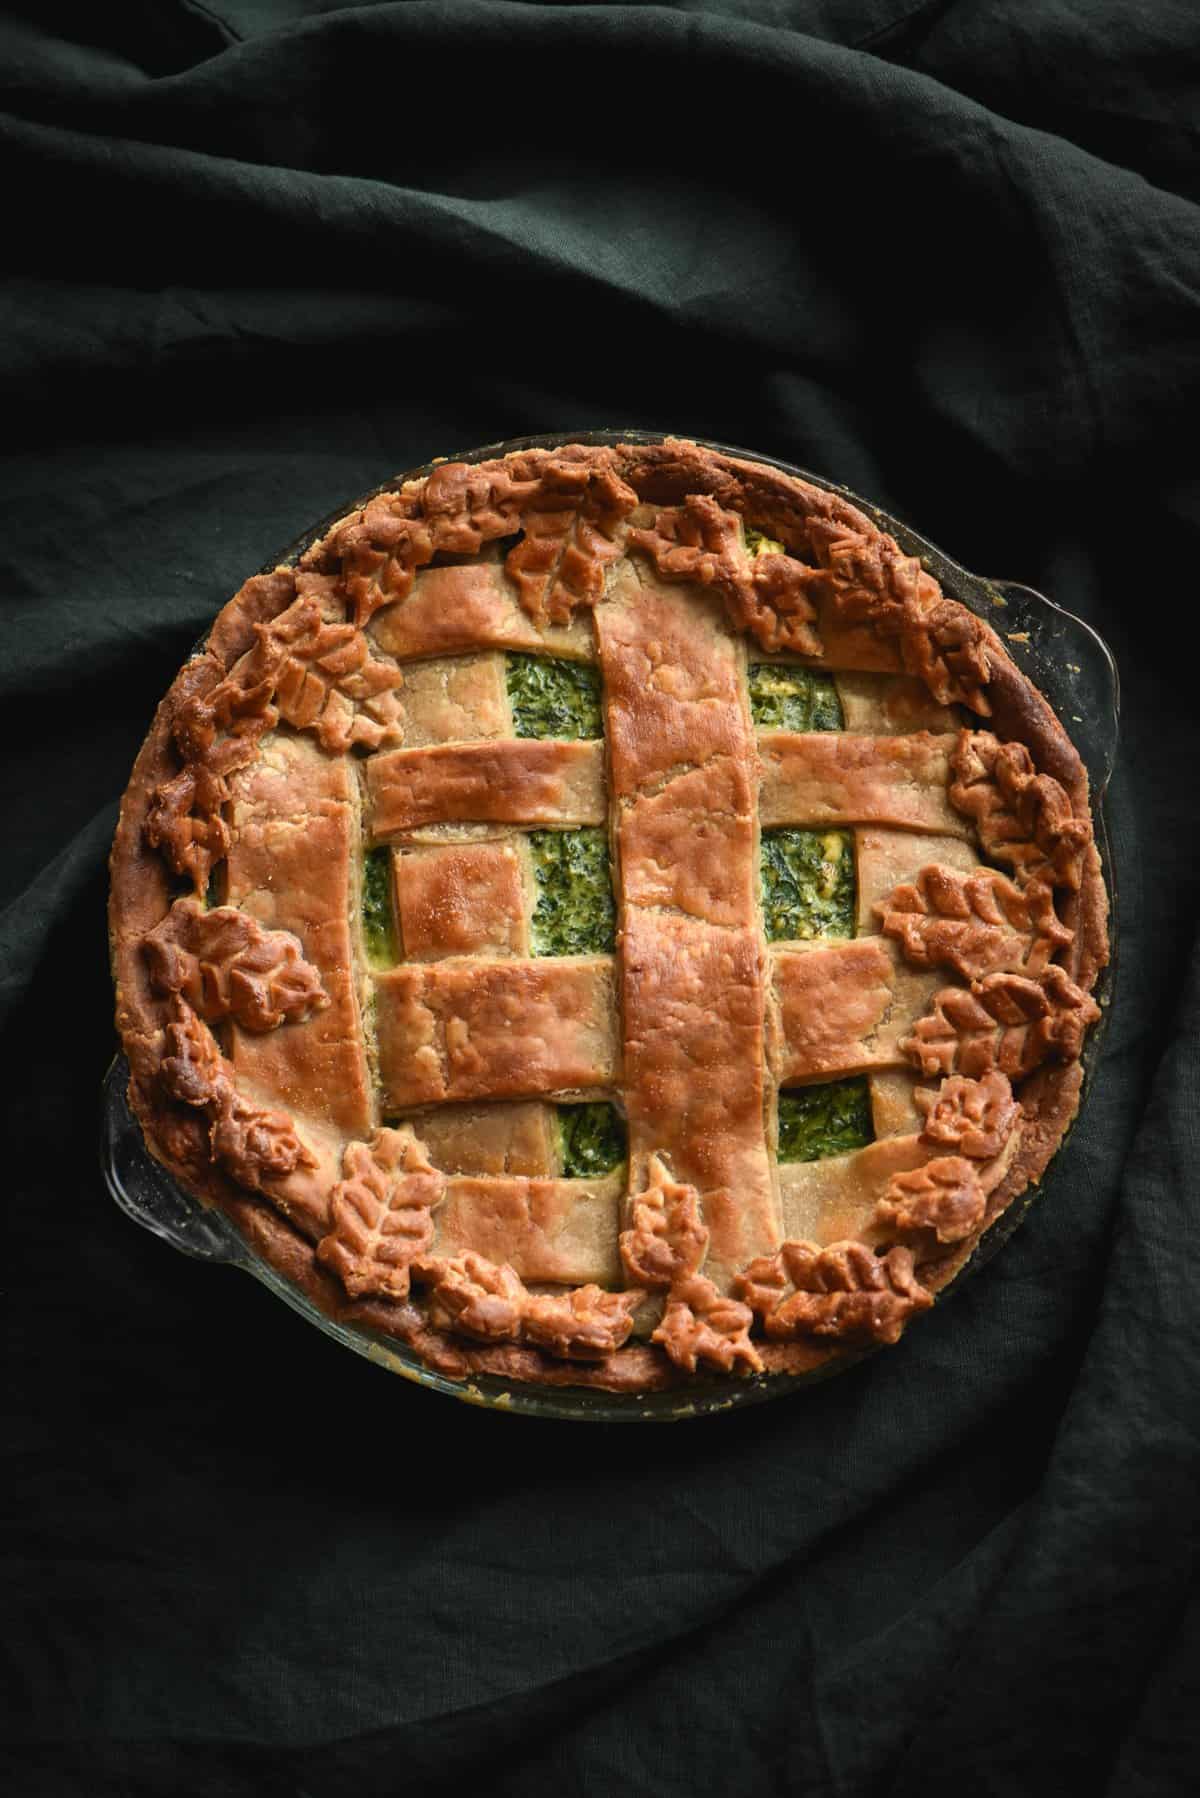 A gluten free greens and feta pie with pastry latticing and decorative pastry leaves against a dark green backdrop